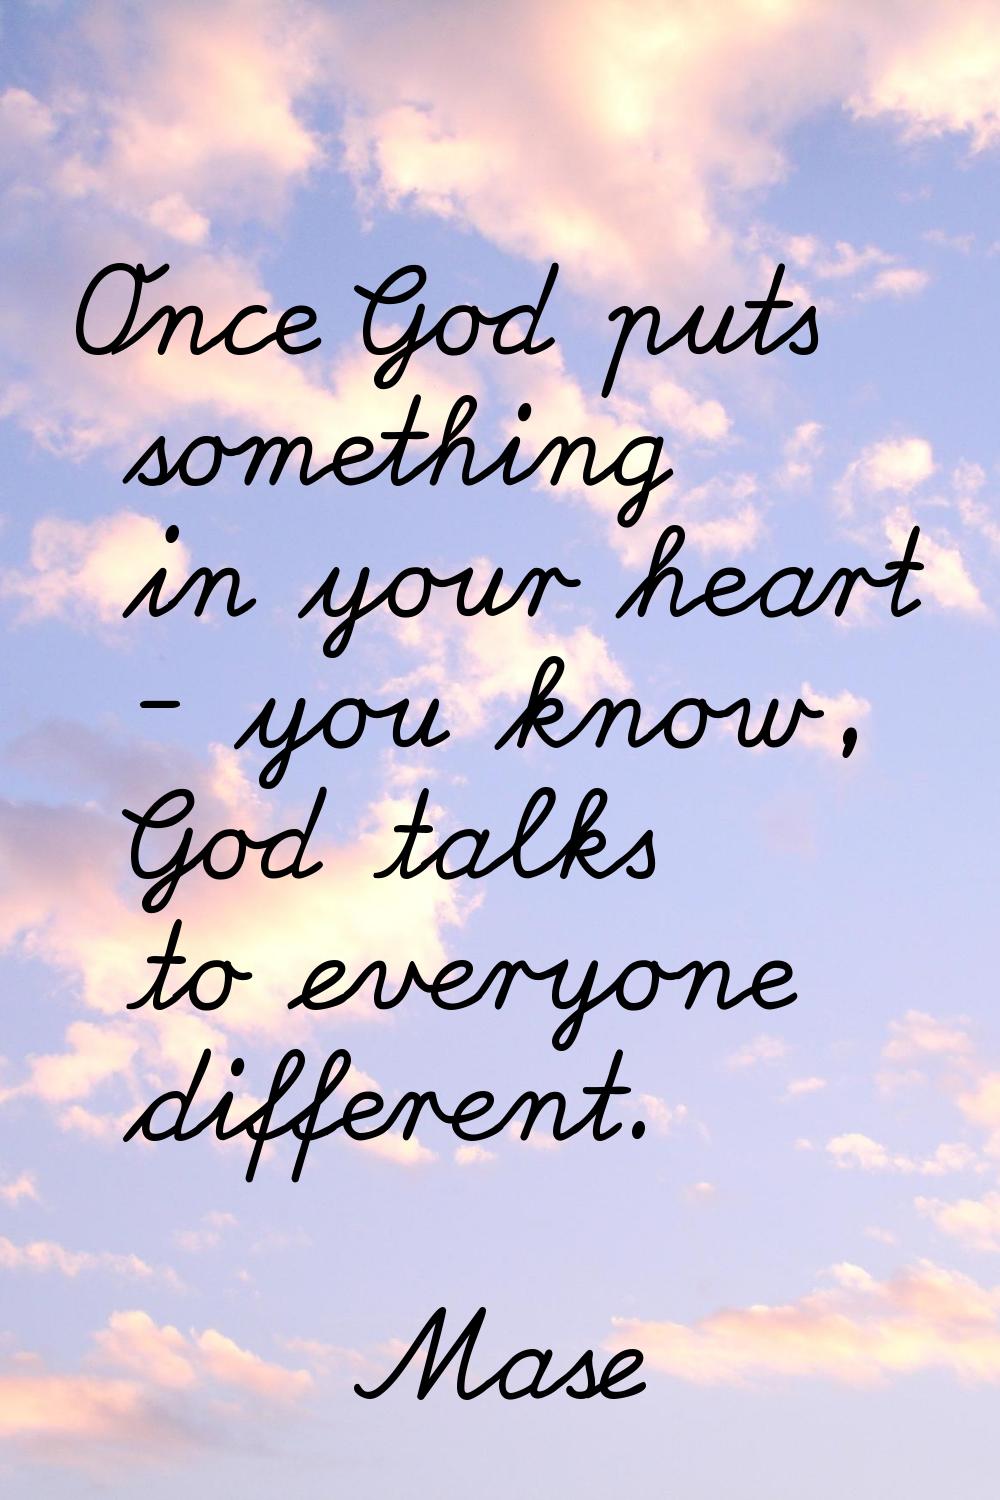 Once God puts something in your heart - you know, God talks to everyone different.